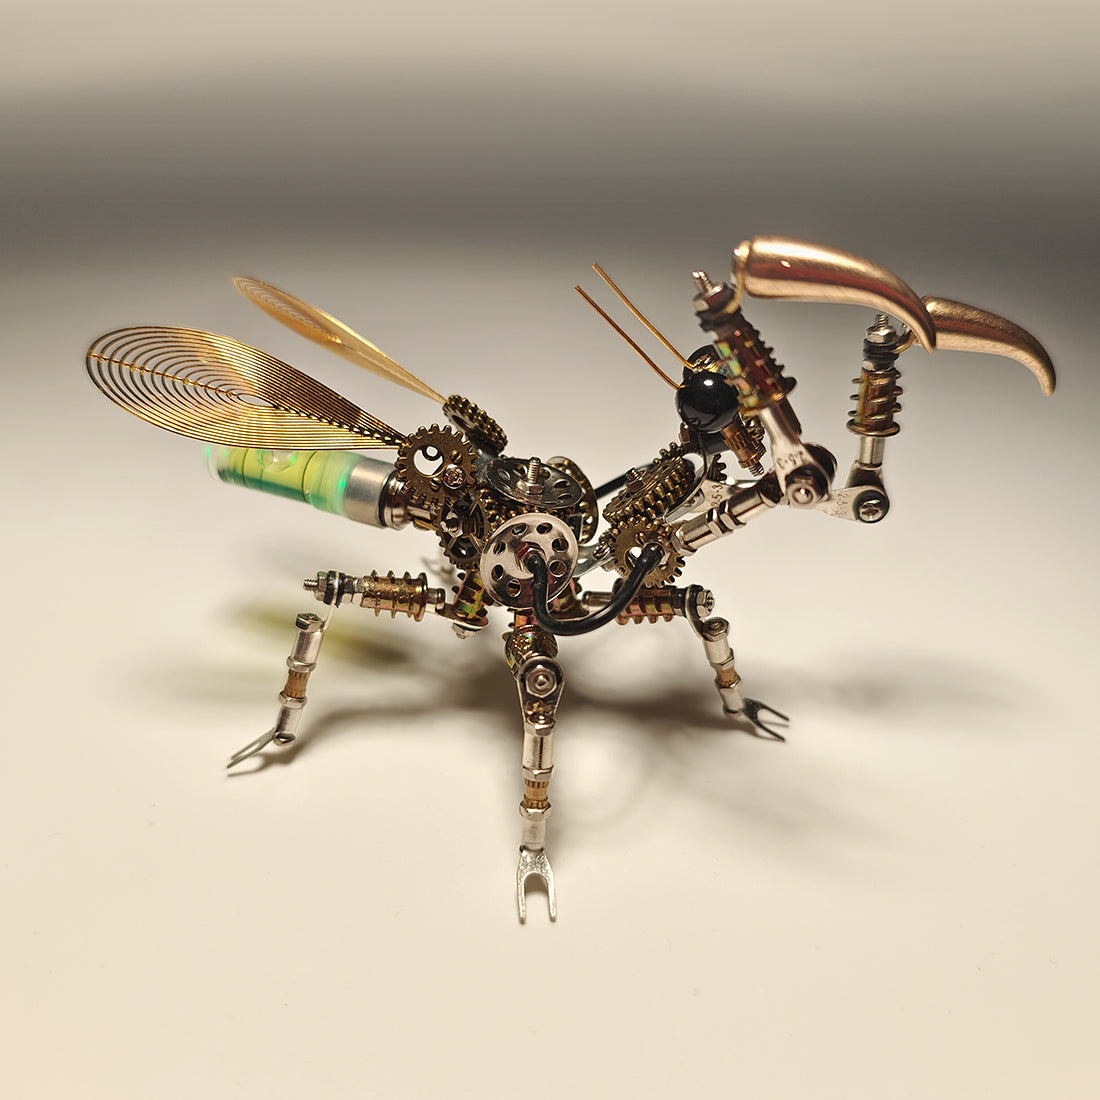 300PCS+ Steampunk Little Mantis with Glow Light 3D Metal Insect Model DIY Kits